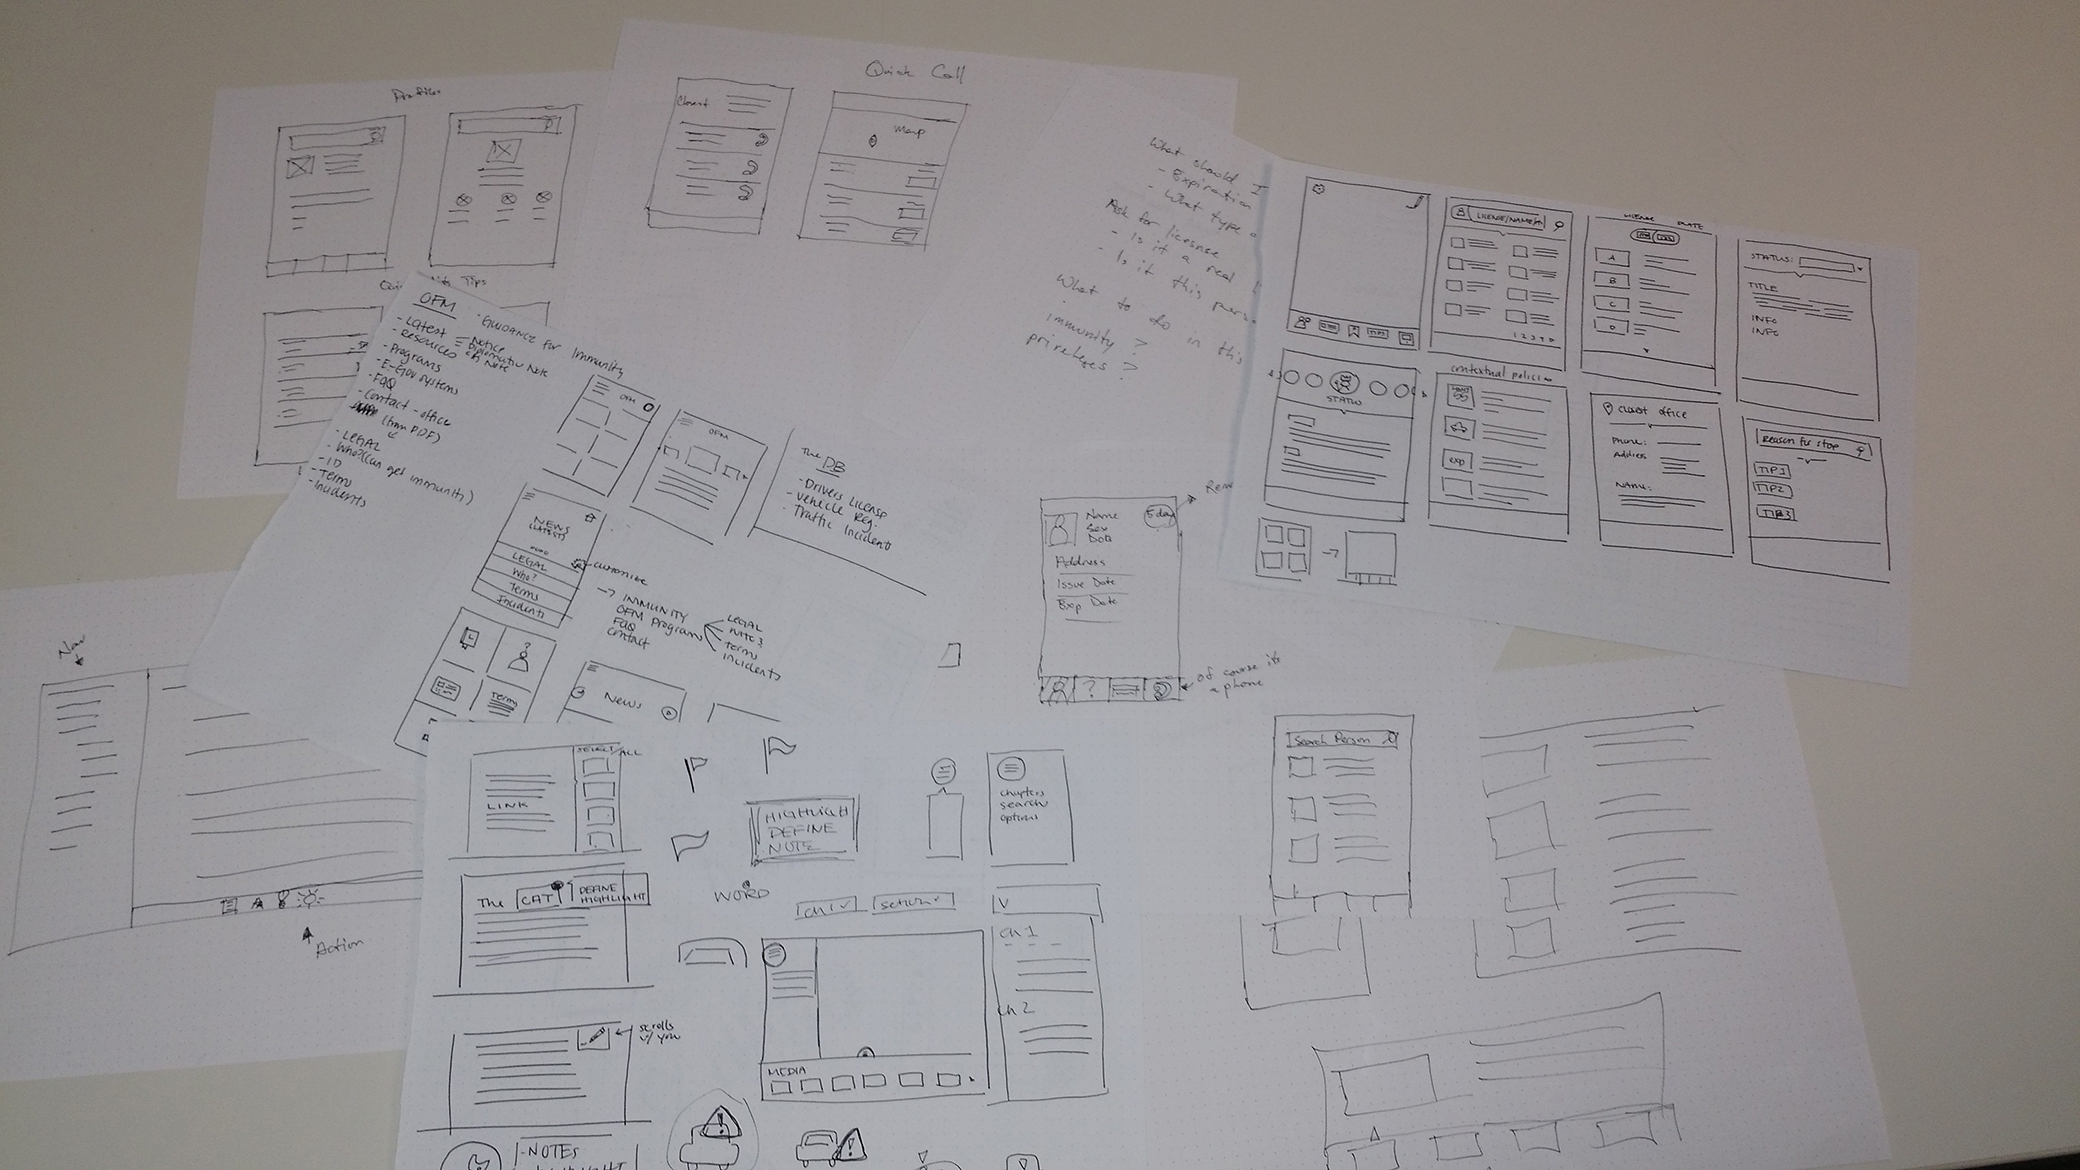 Sketches of the Smartphone and eBook Apps